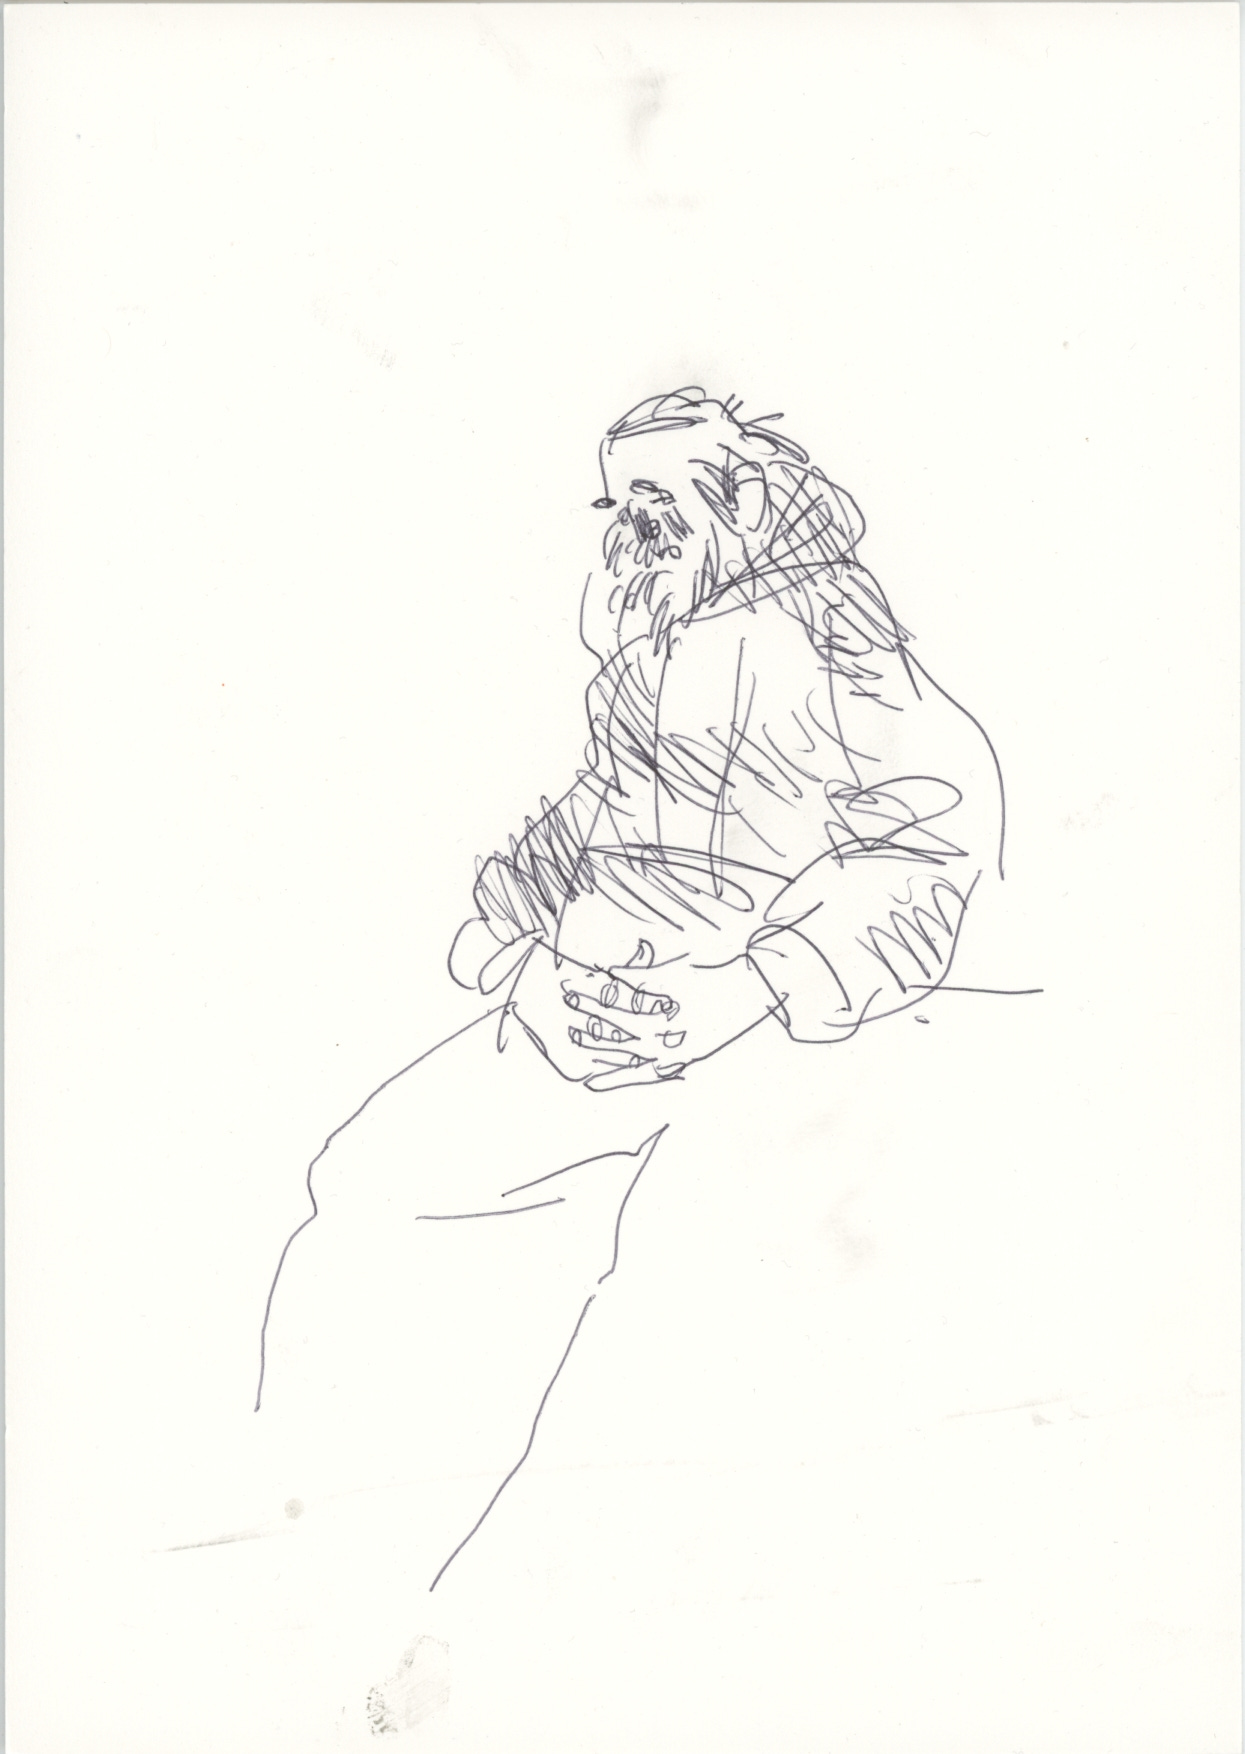 Sketchbook drawing of a man on the street.